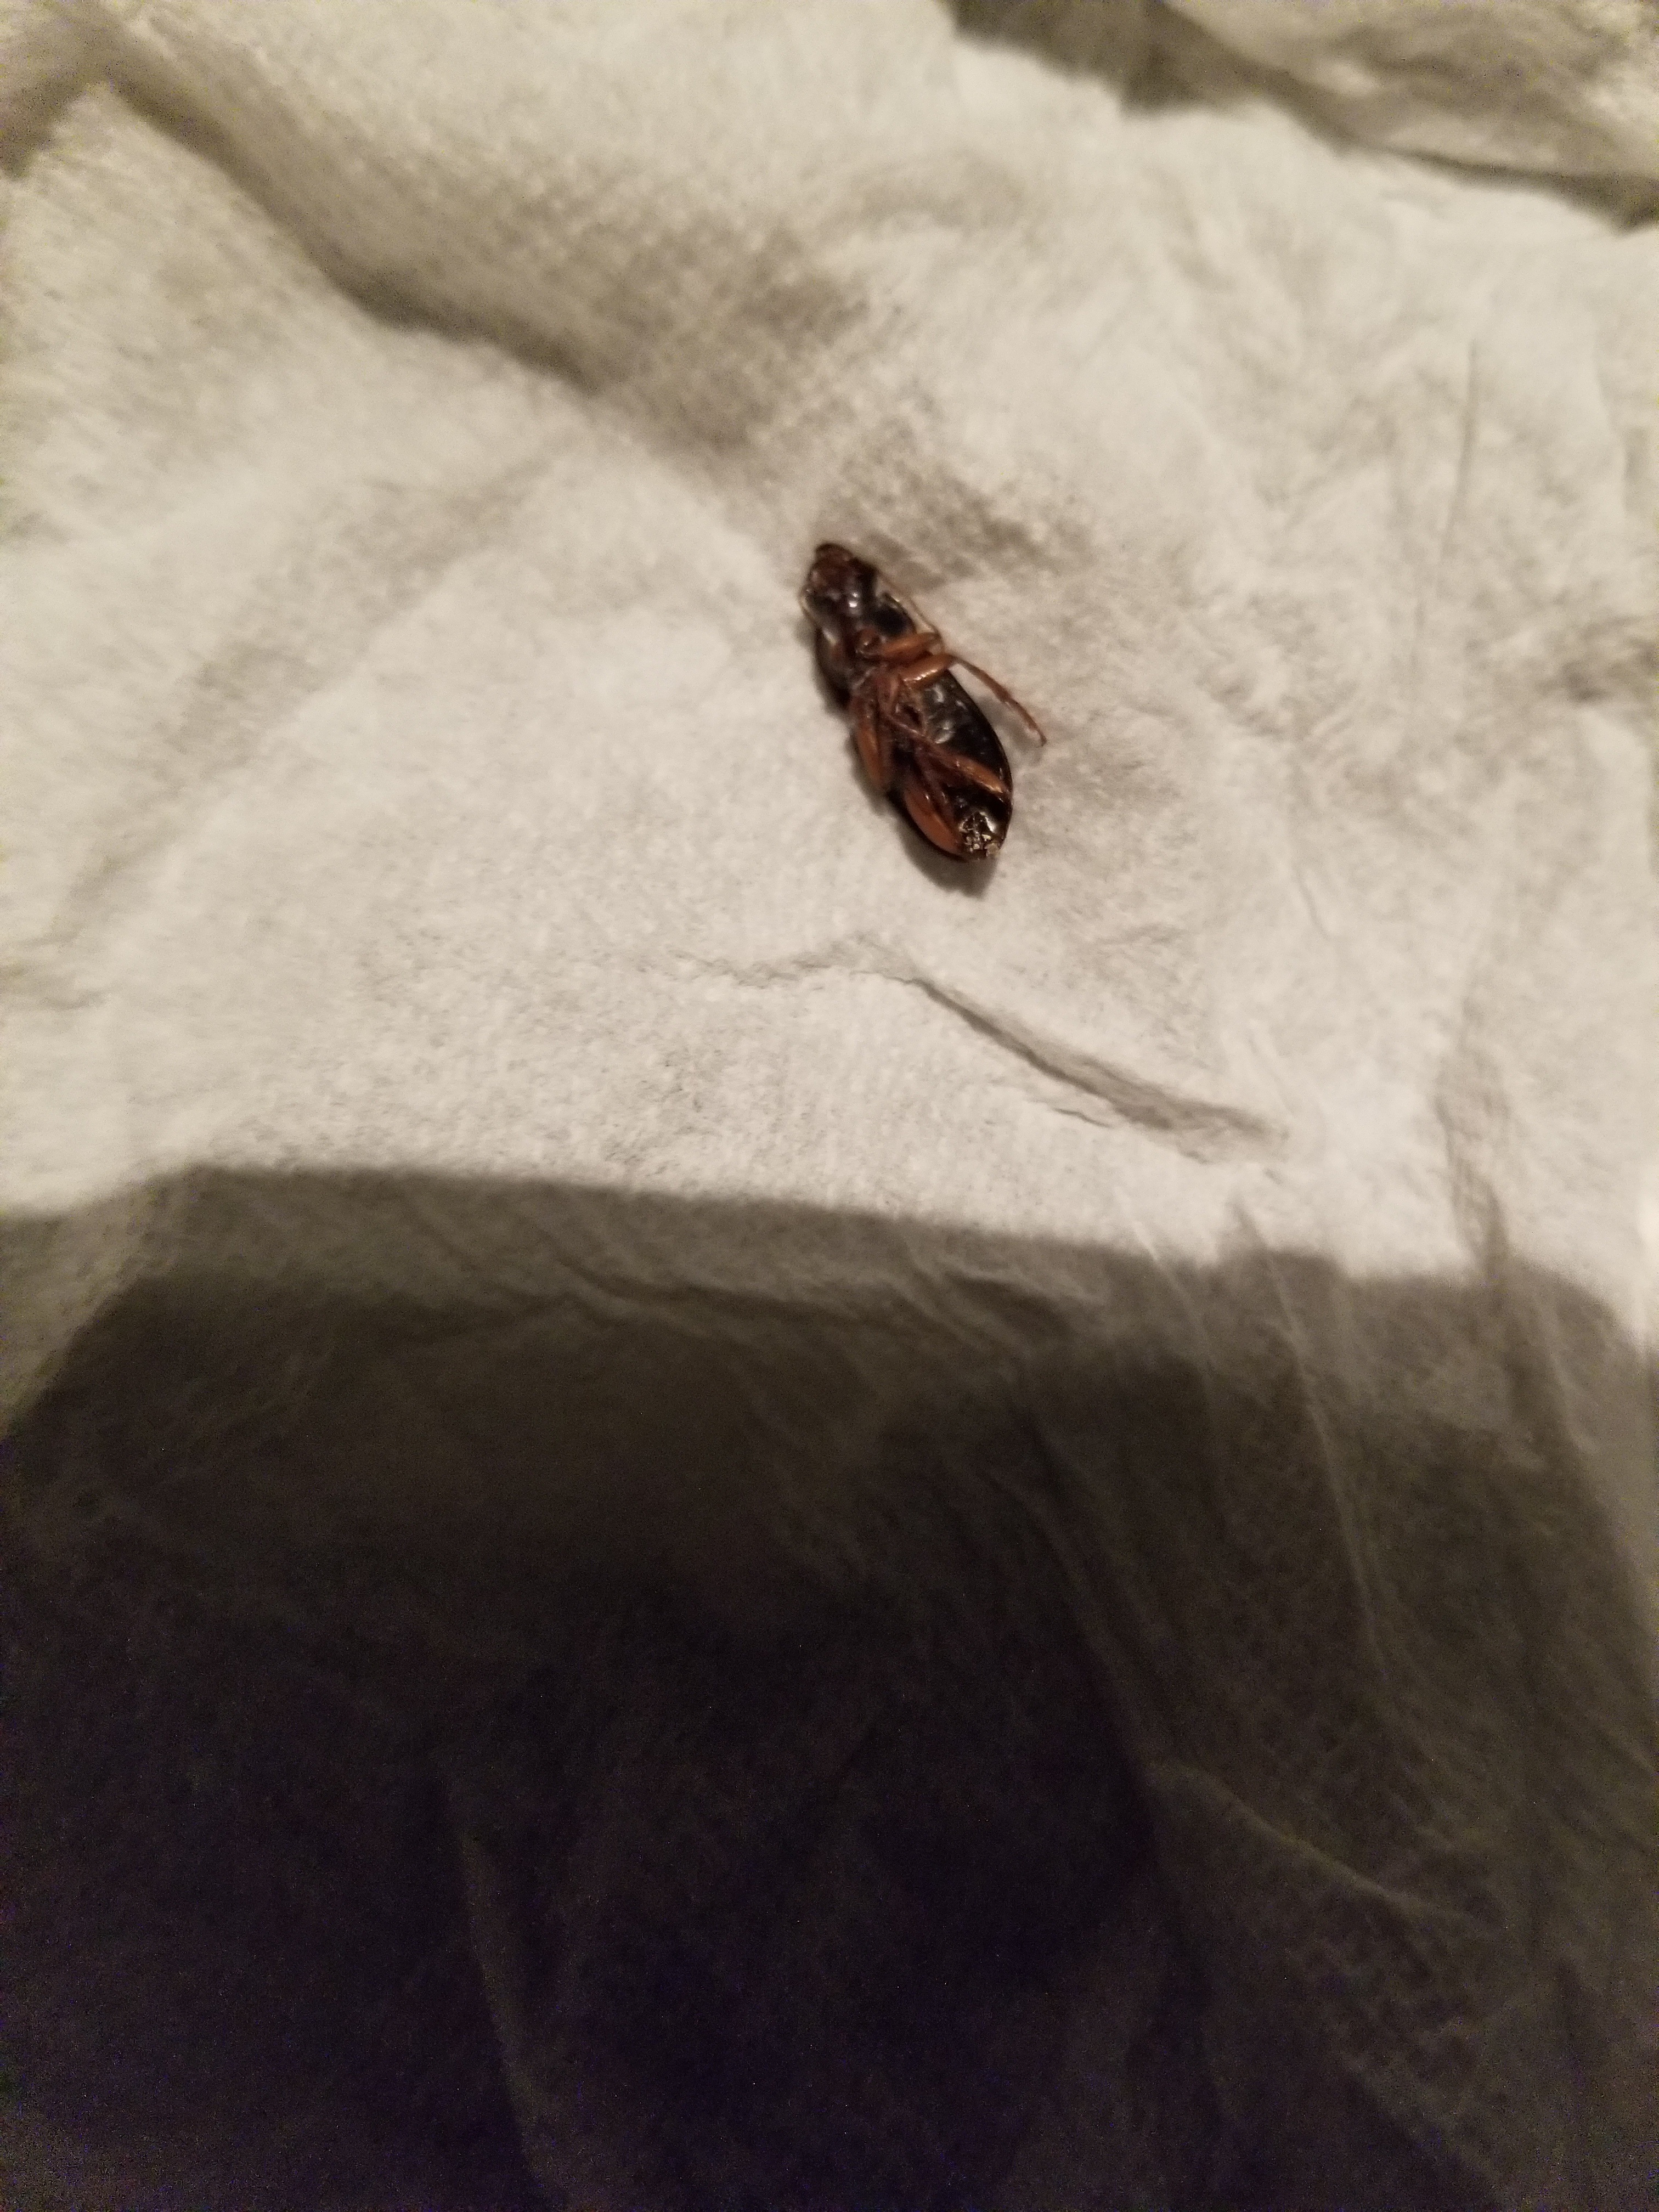 tiny bugs in basement